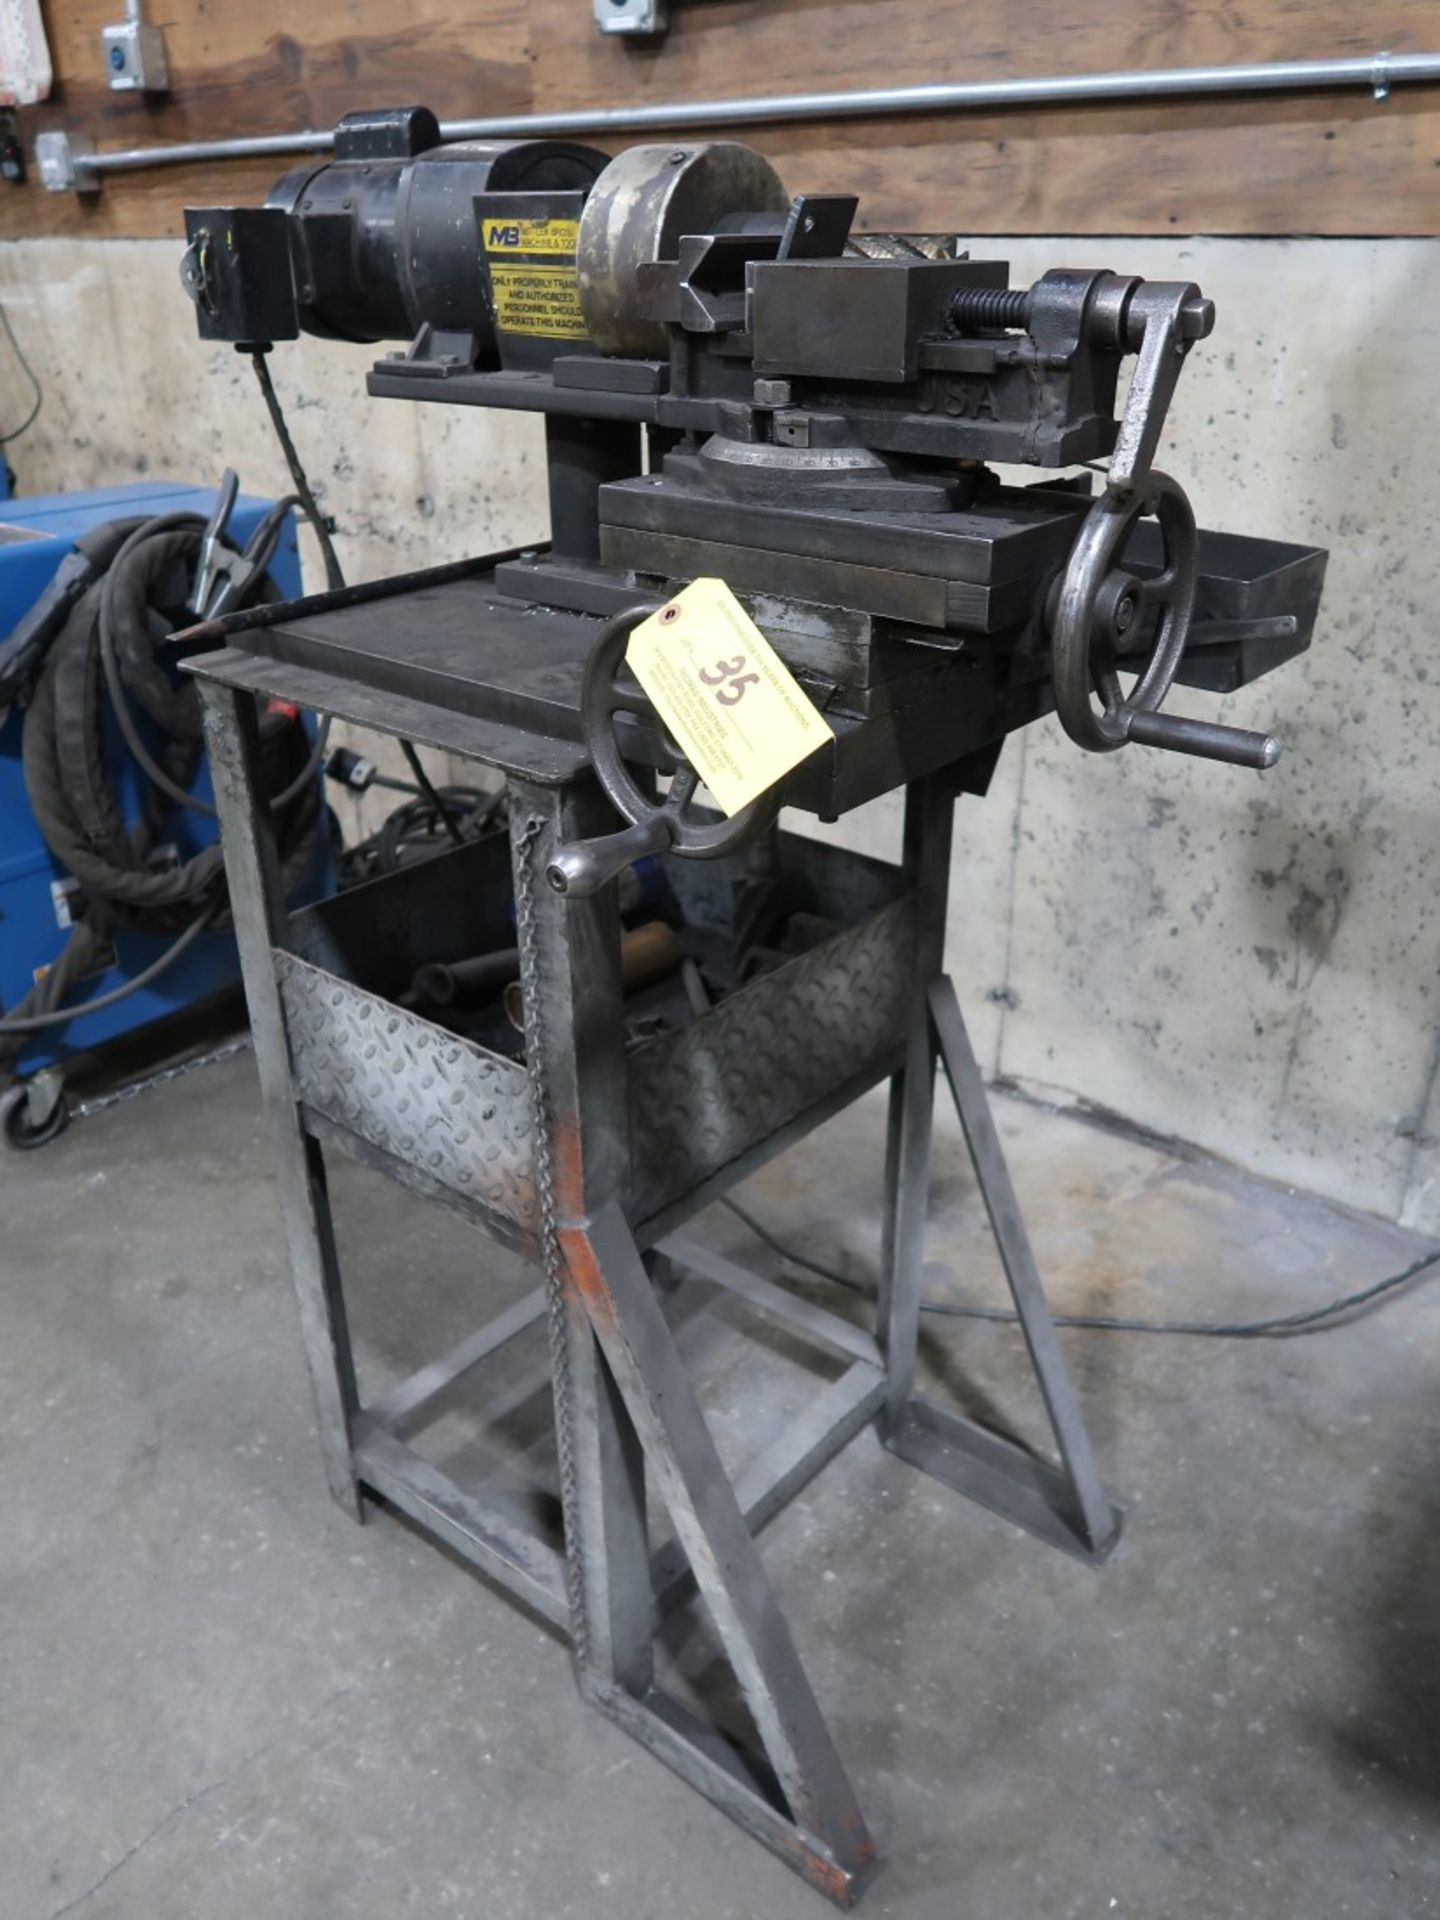 Mittler Brothers Machine & Tool Horizontal Bench Top Mill w/ Vise 1/2 HP - Image 3 of 4